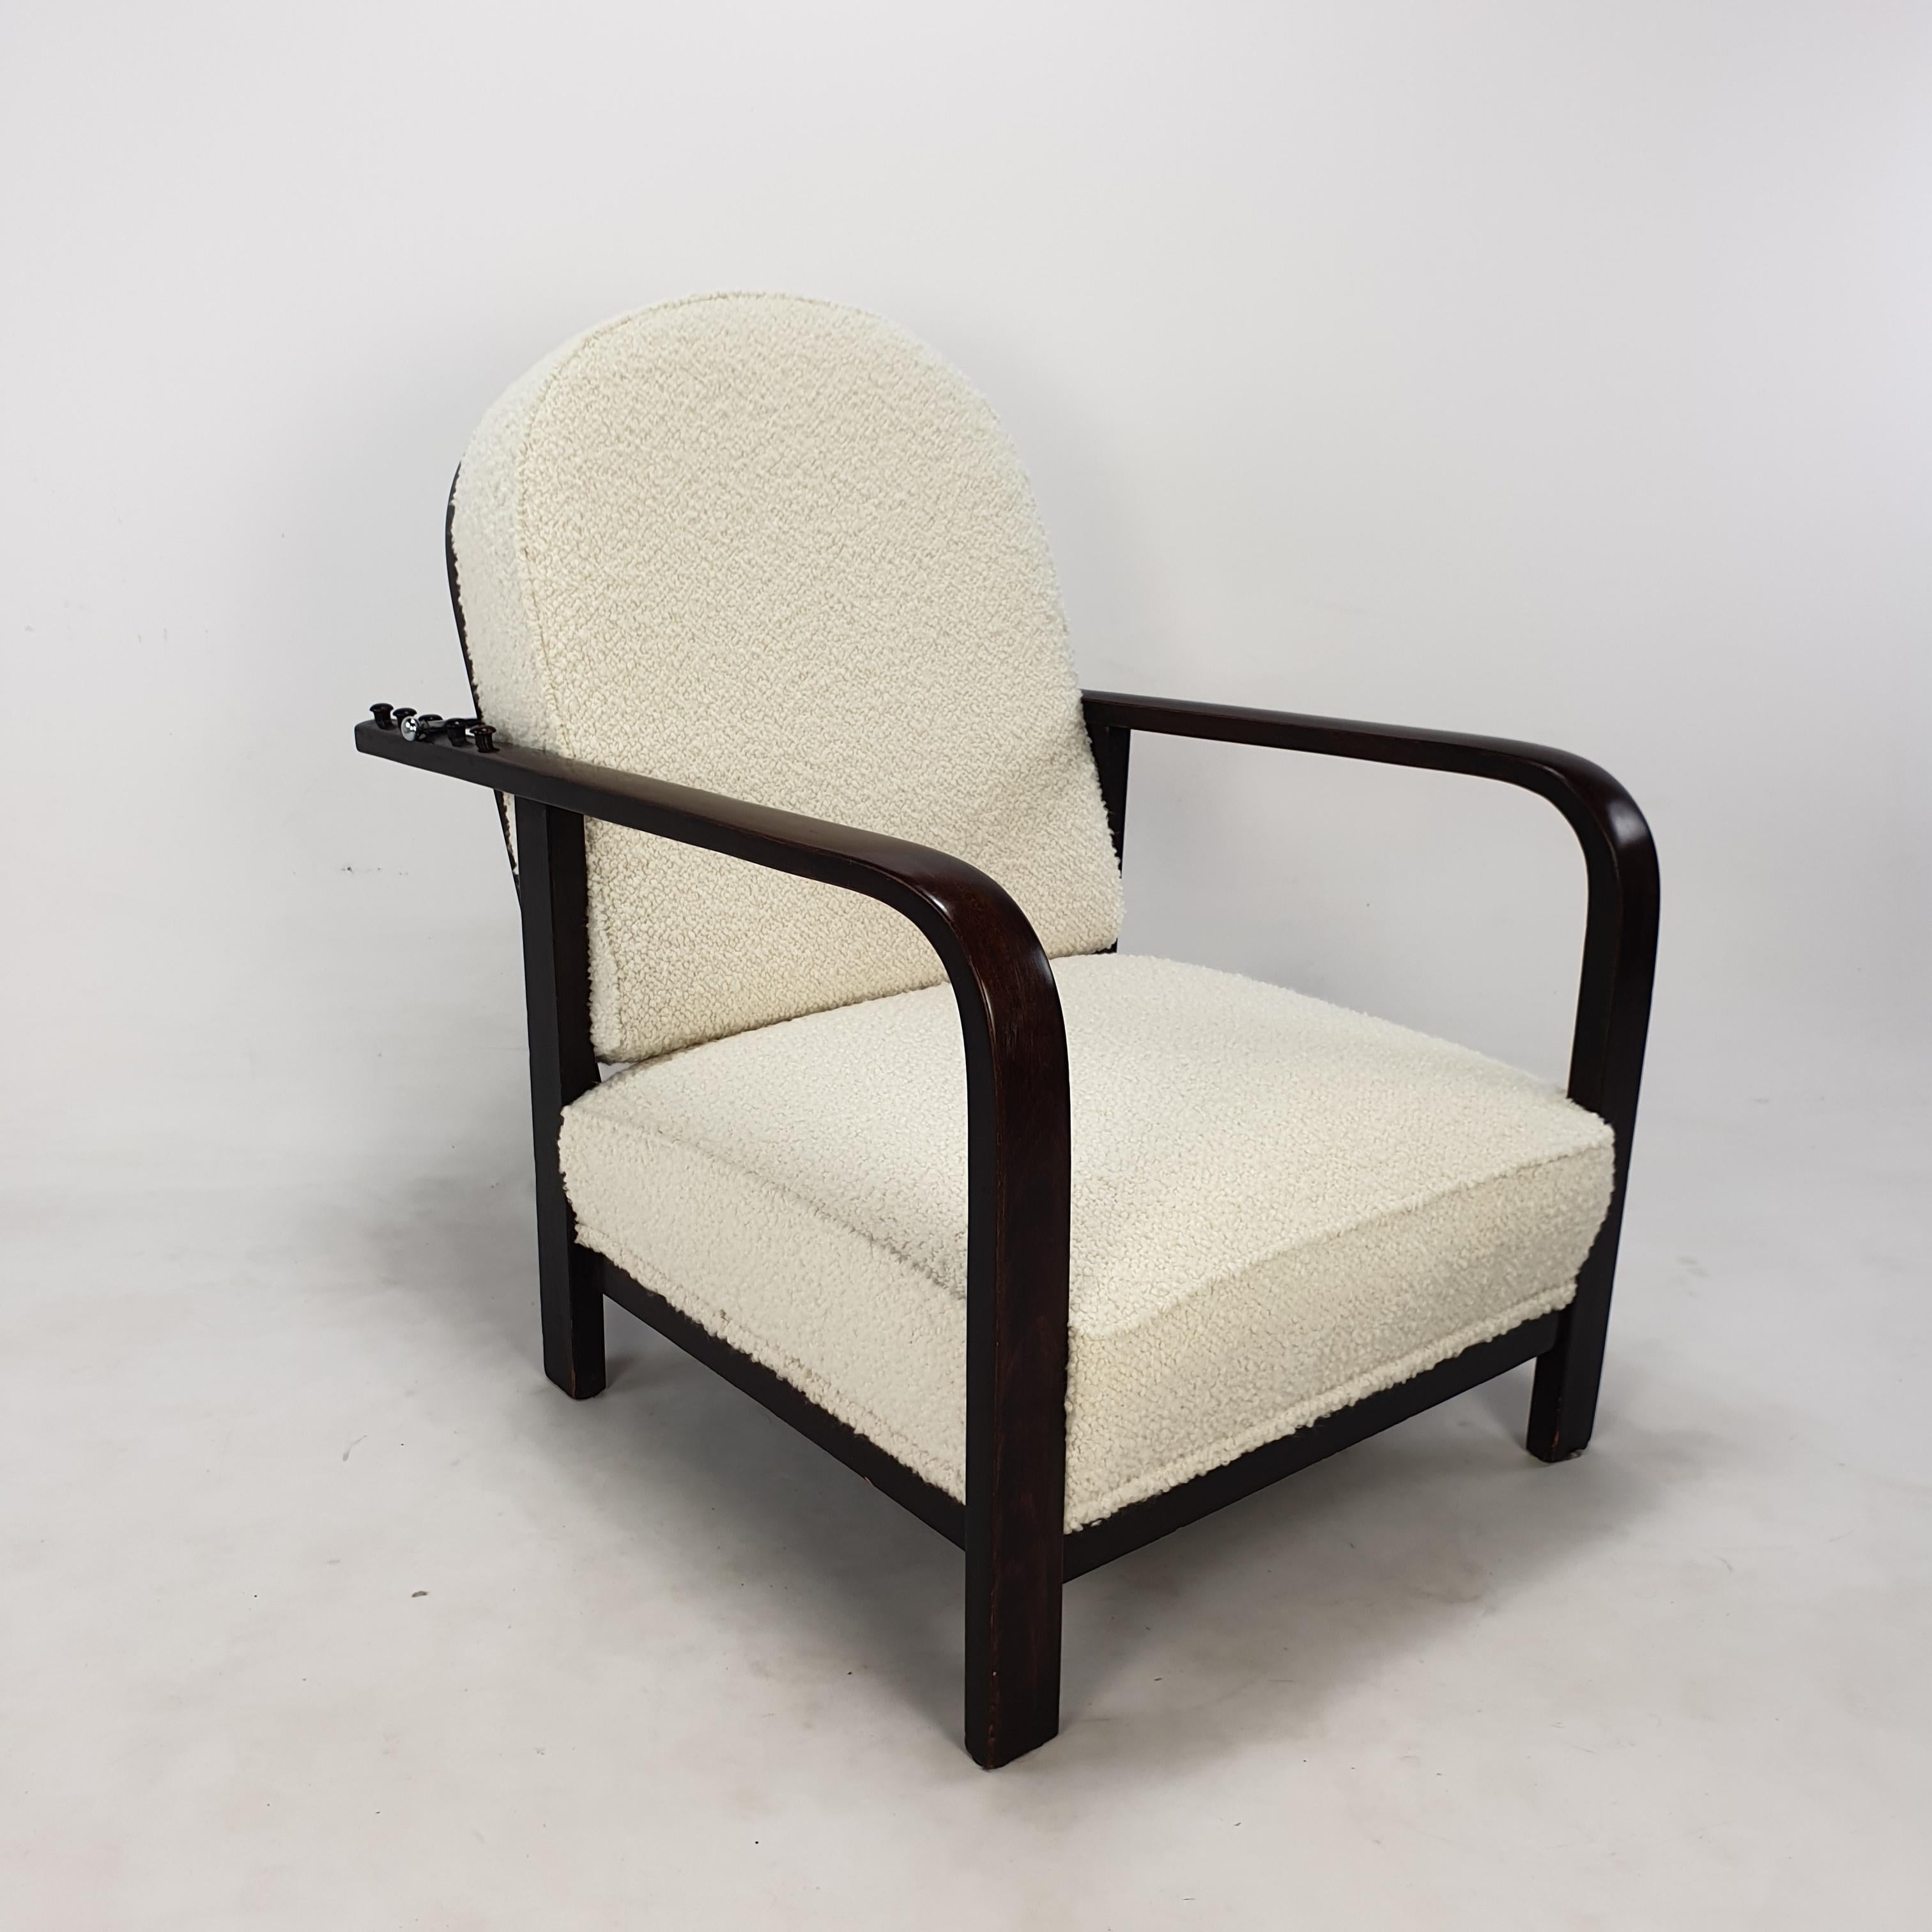 Czech Pair of Adjustable Lounge Chairs by Thonet, 1930's For Sale